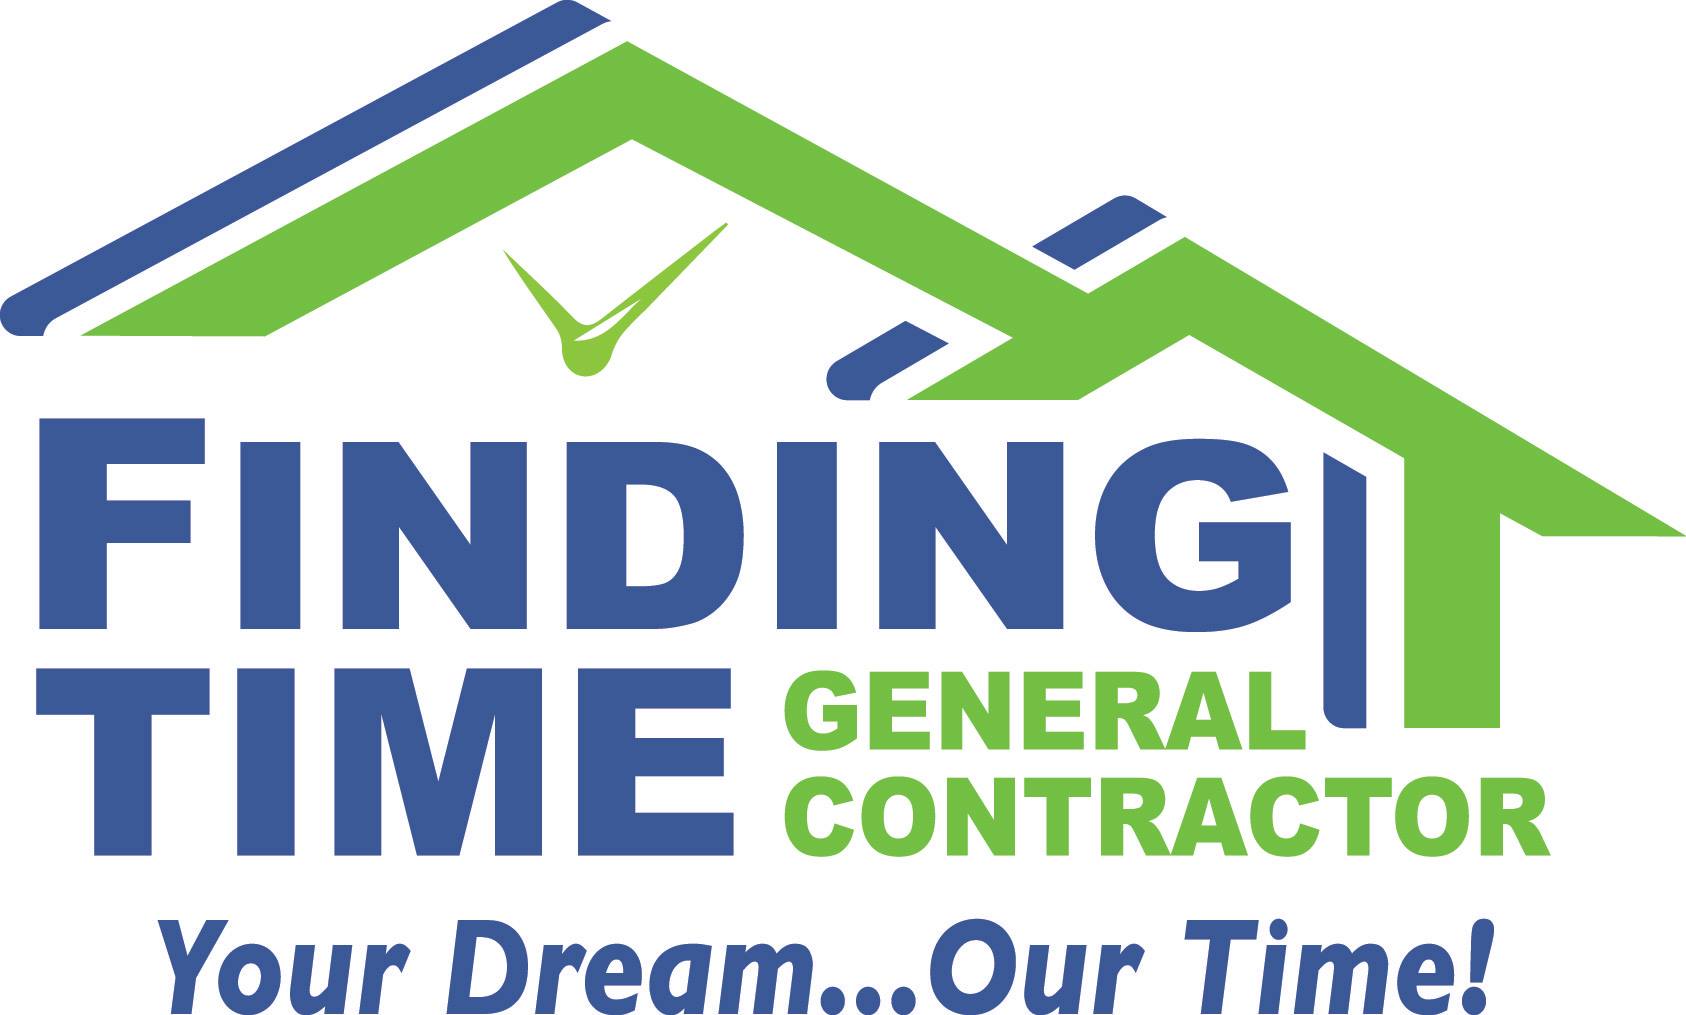 Contracting Logo - Finding Time Contracting | Better Business Bureau® Profile